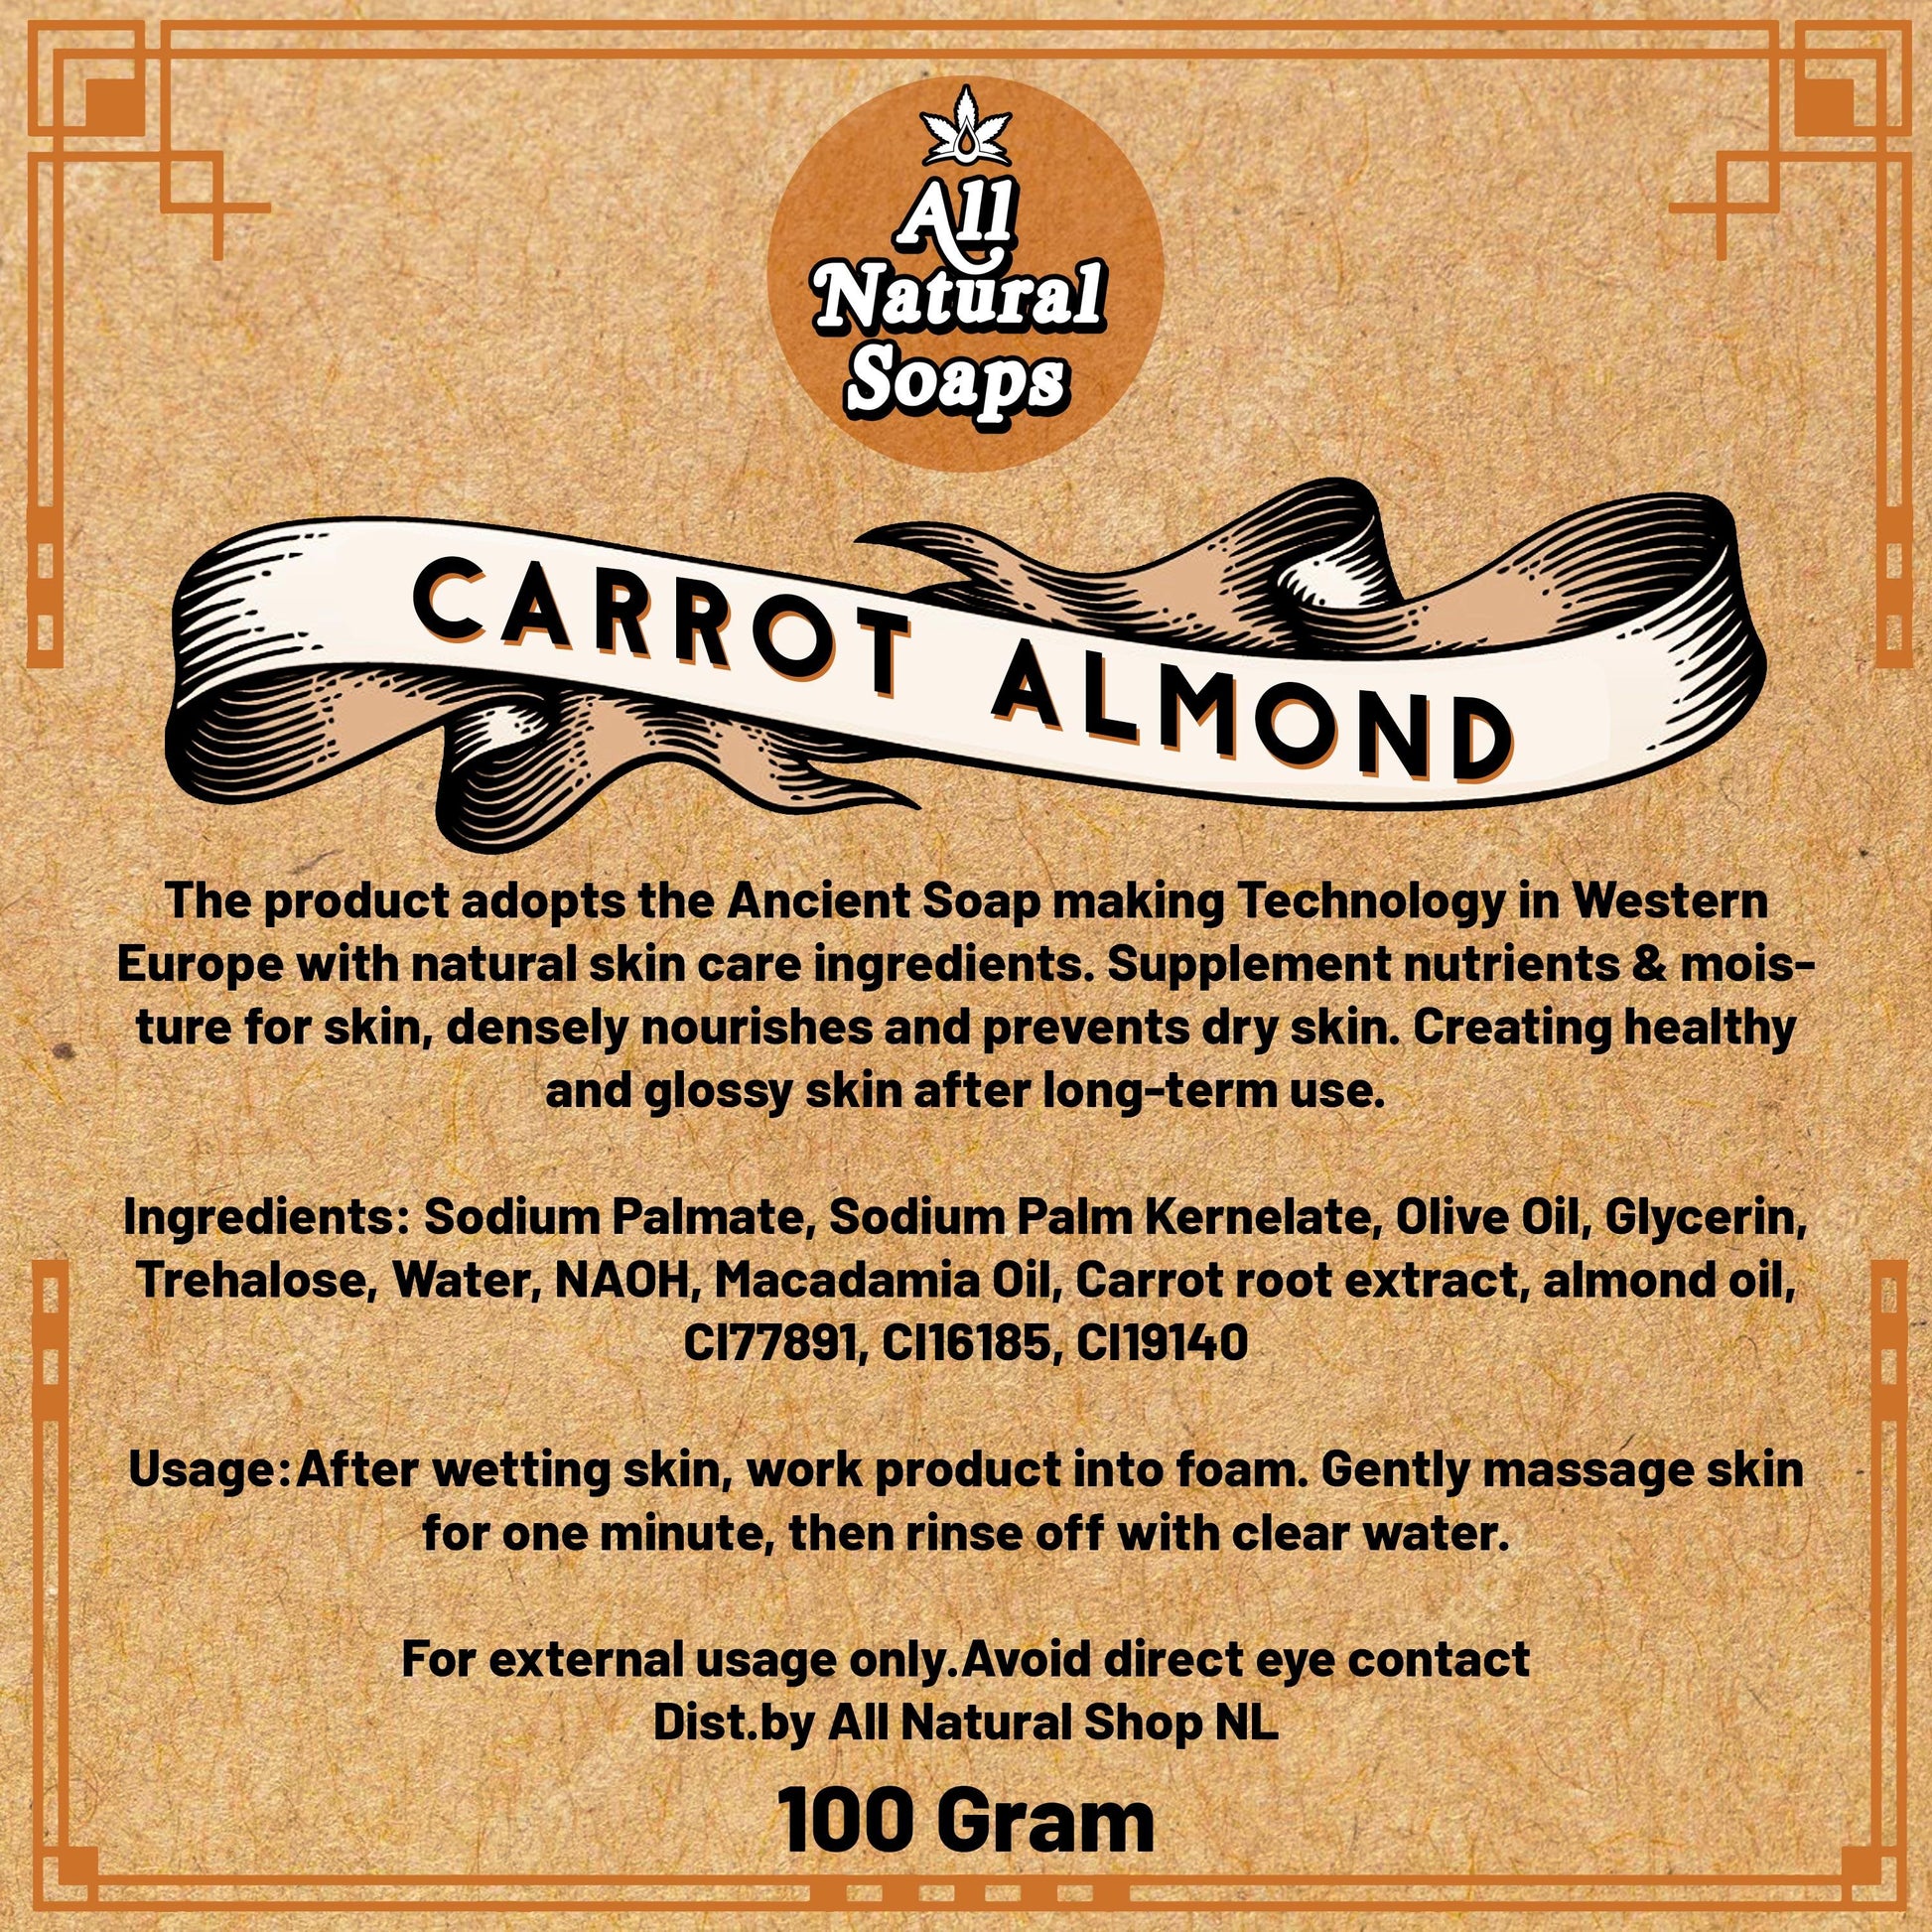 Natural Soap - Carrot Almond - All Natural Soaps